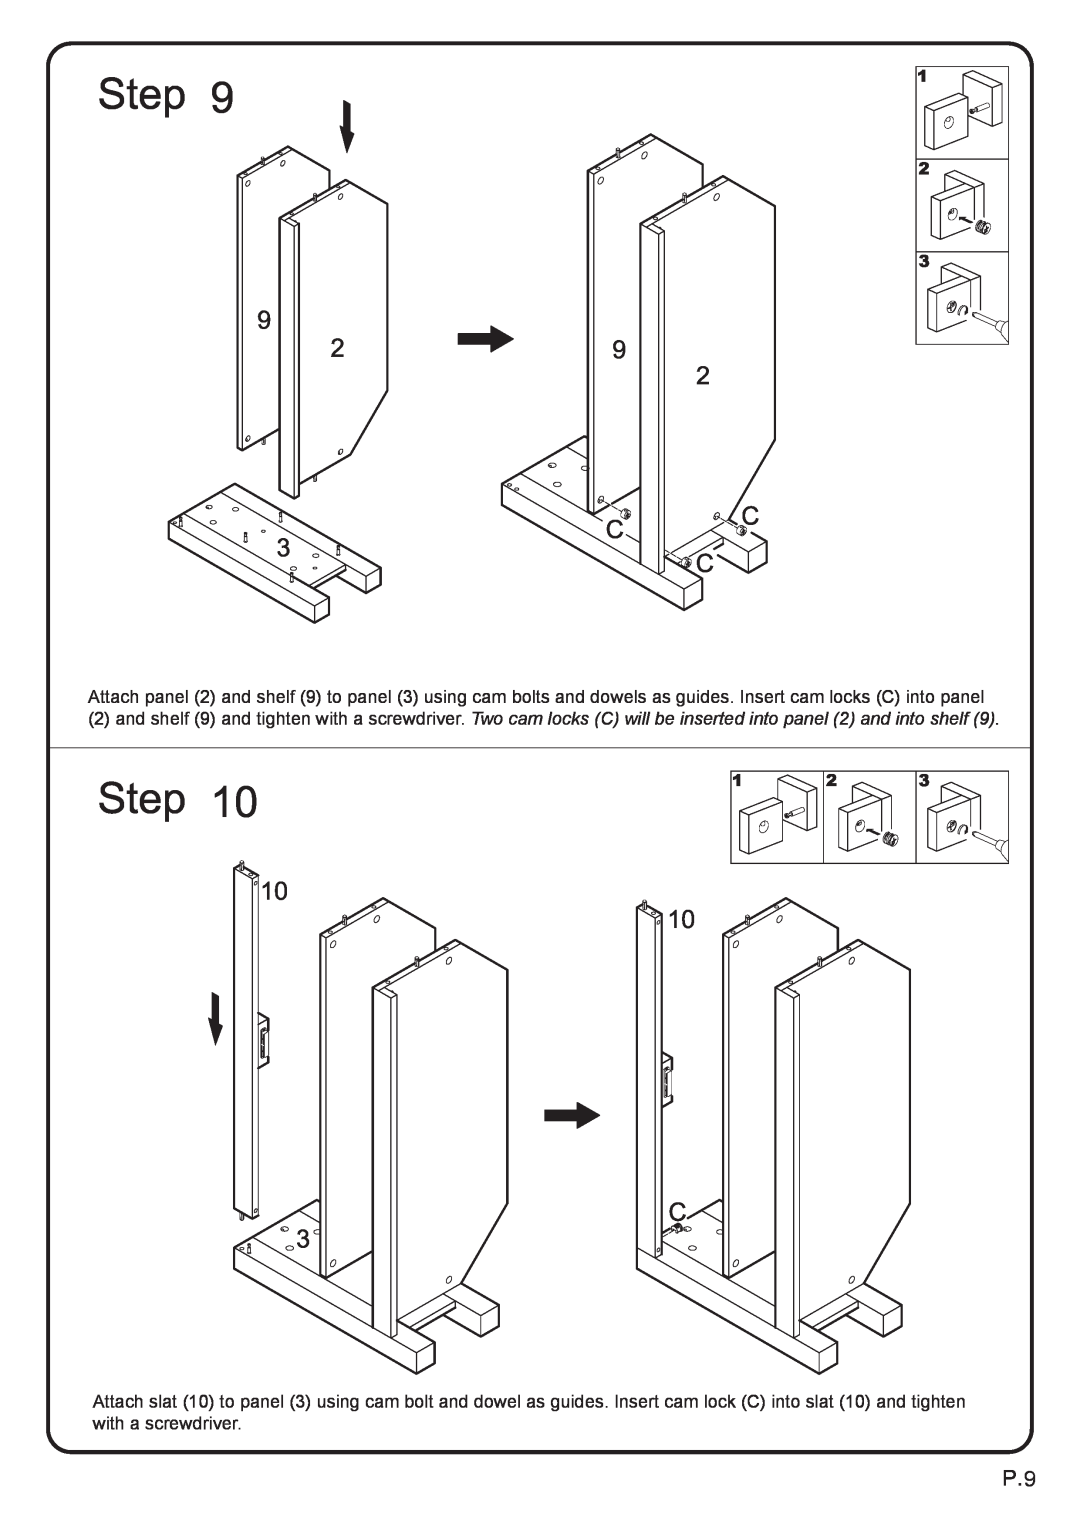 Walker W44CCRBL Attach panel 2 and shelf 9 to panel 3 using cam bolts and dowels as guides. Insert cam locks C into panel 